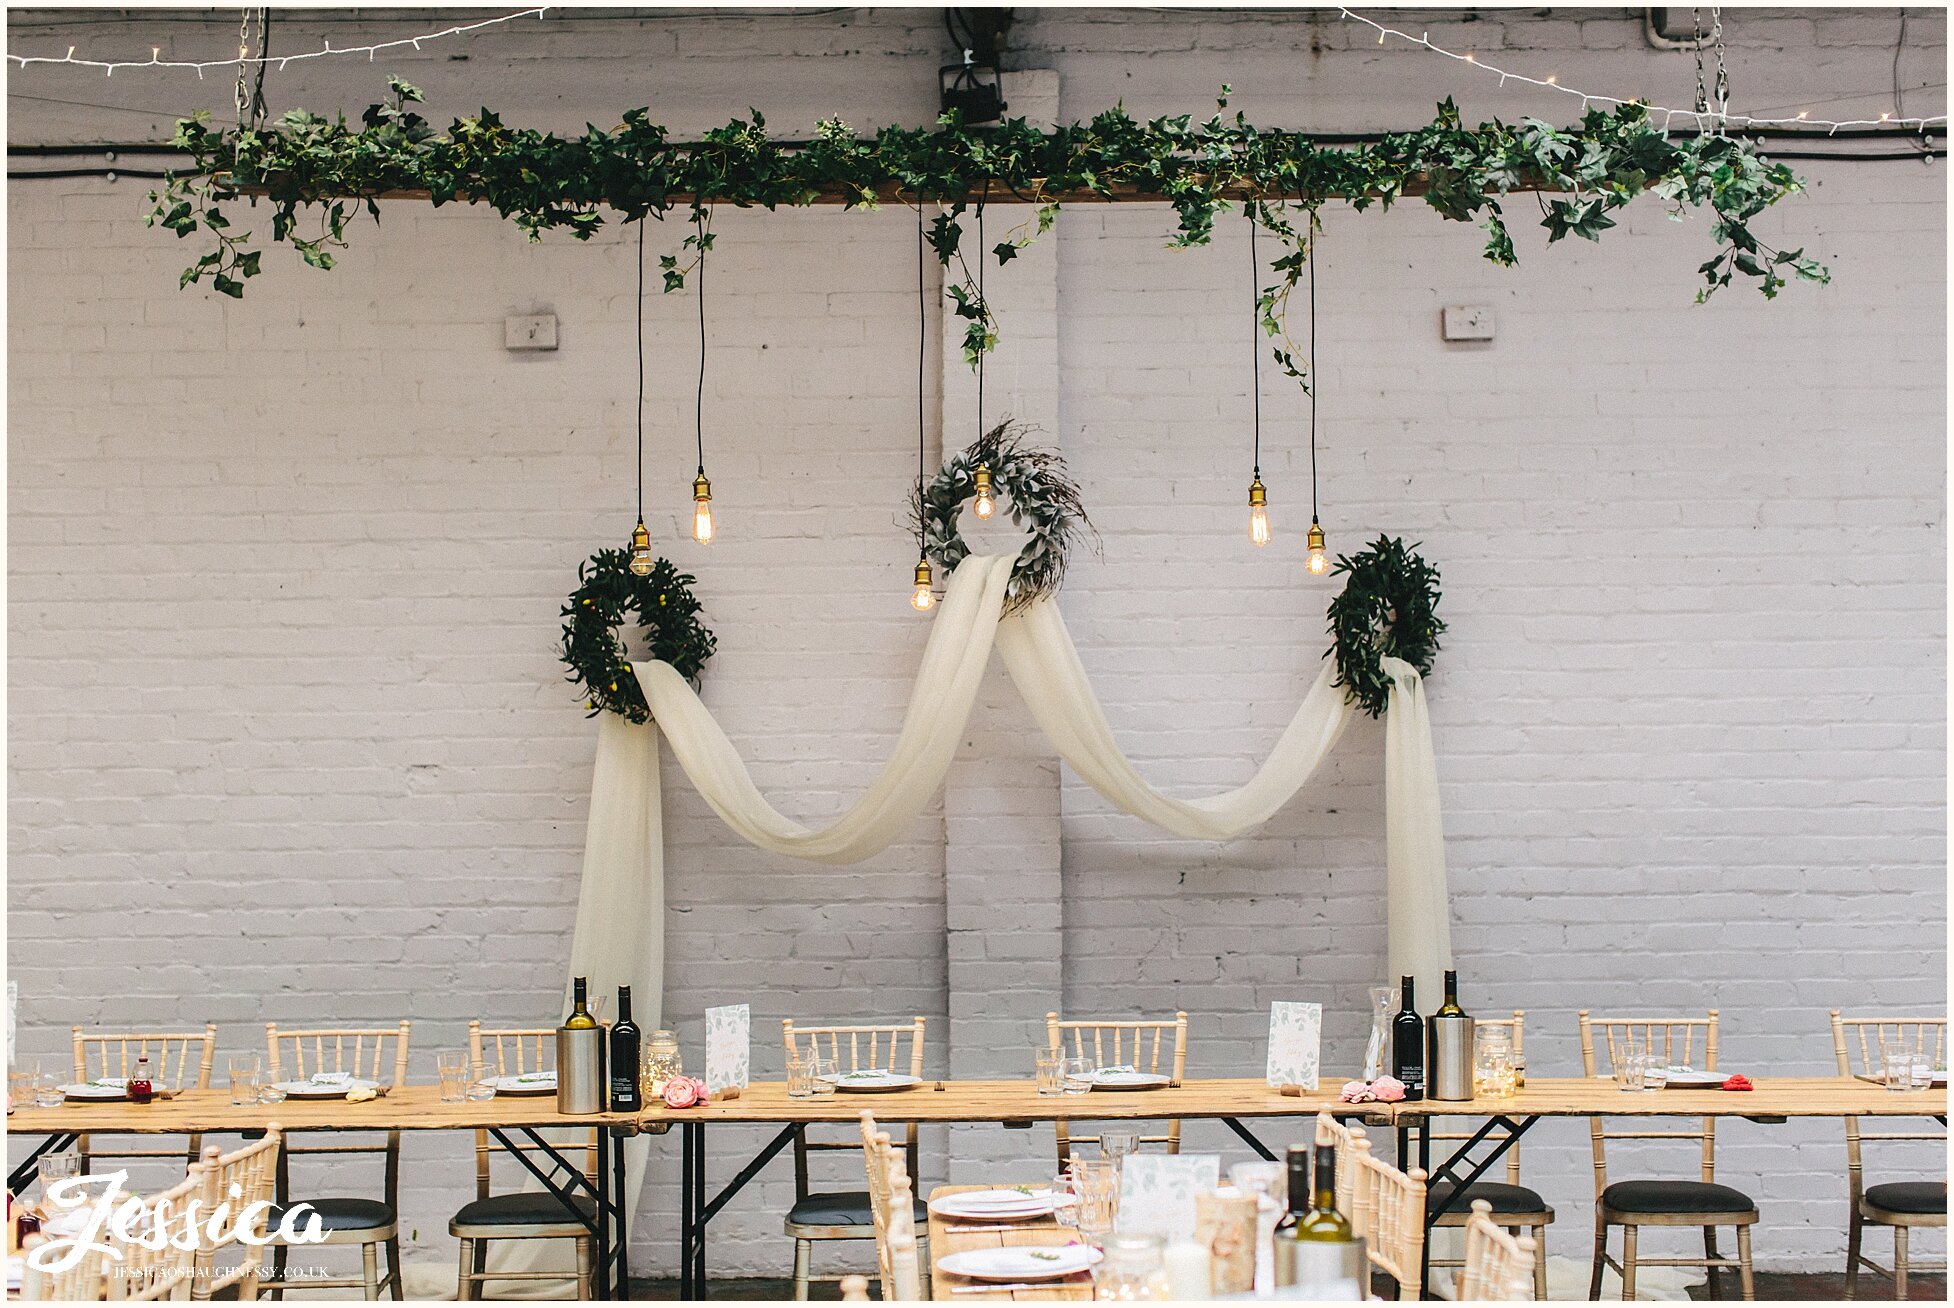 quirky decorations decorate liverpool wedding at constellations, baltic triangle